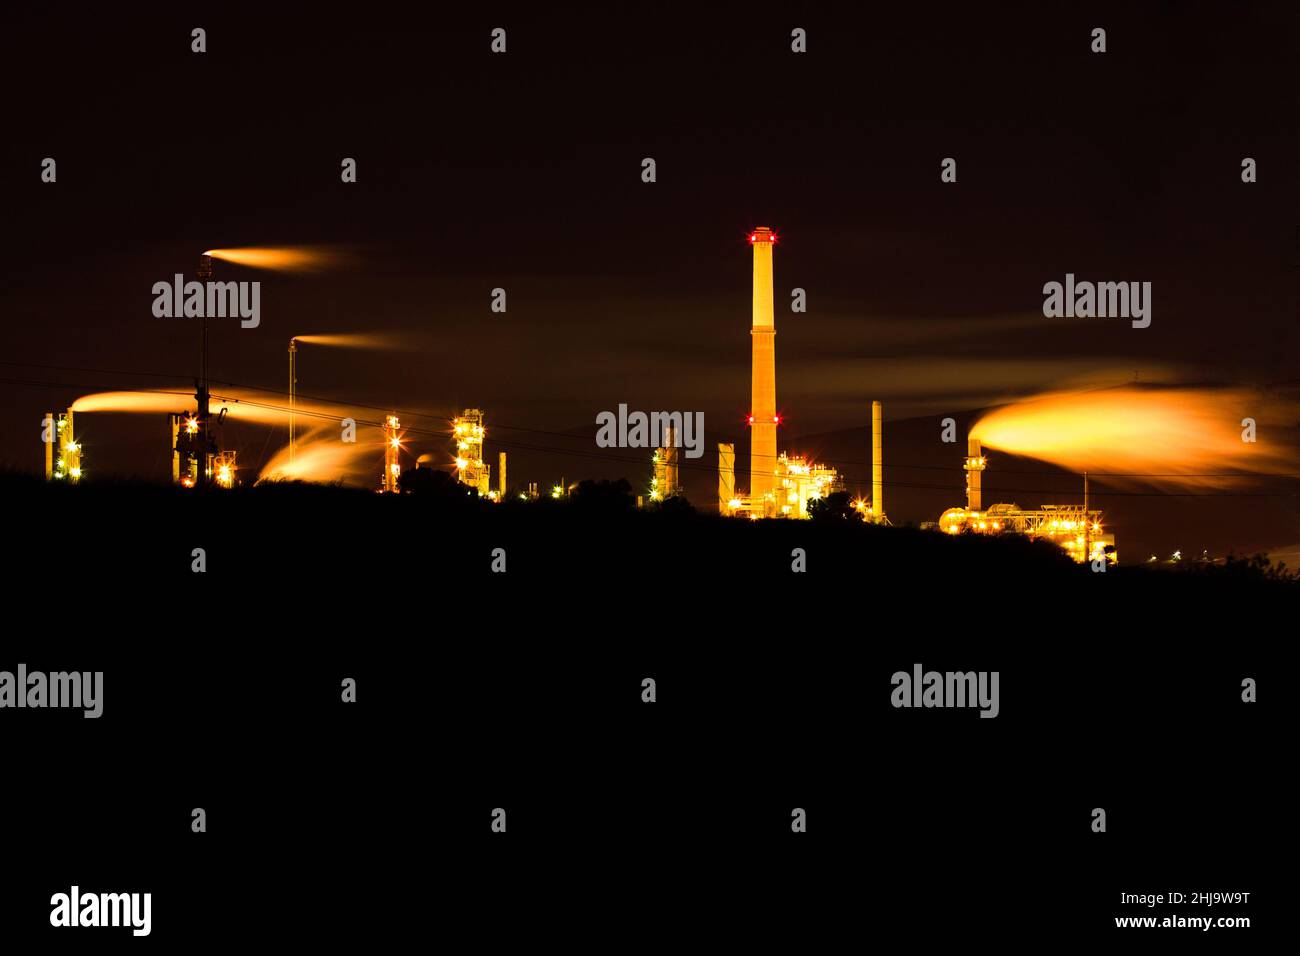 An oil refinery with glowing yellow smoke pollution rising into the dark black night sky. Stock Photo